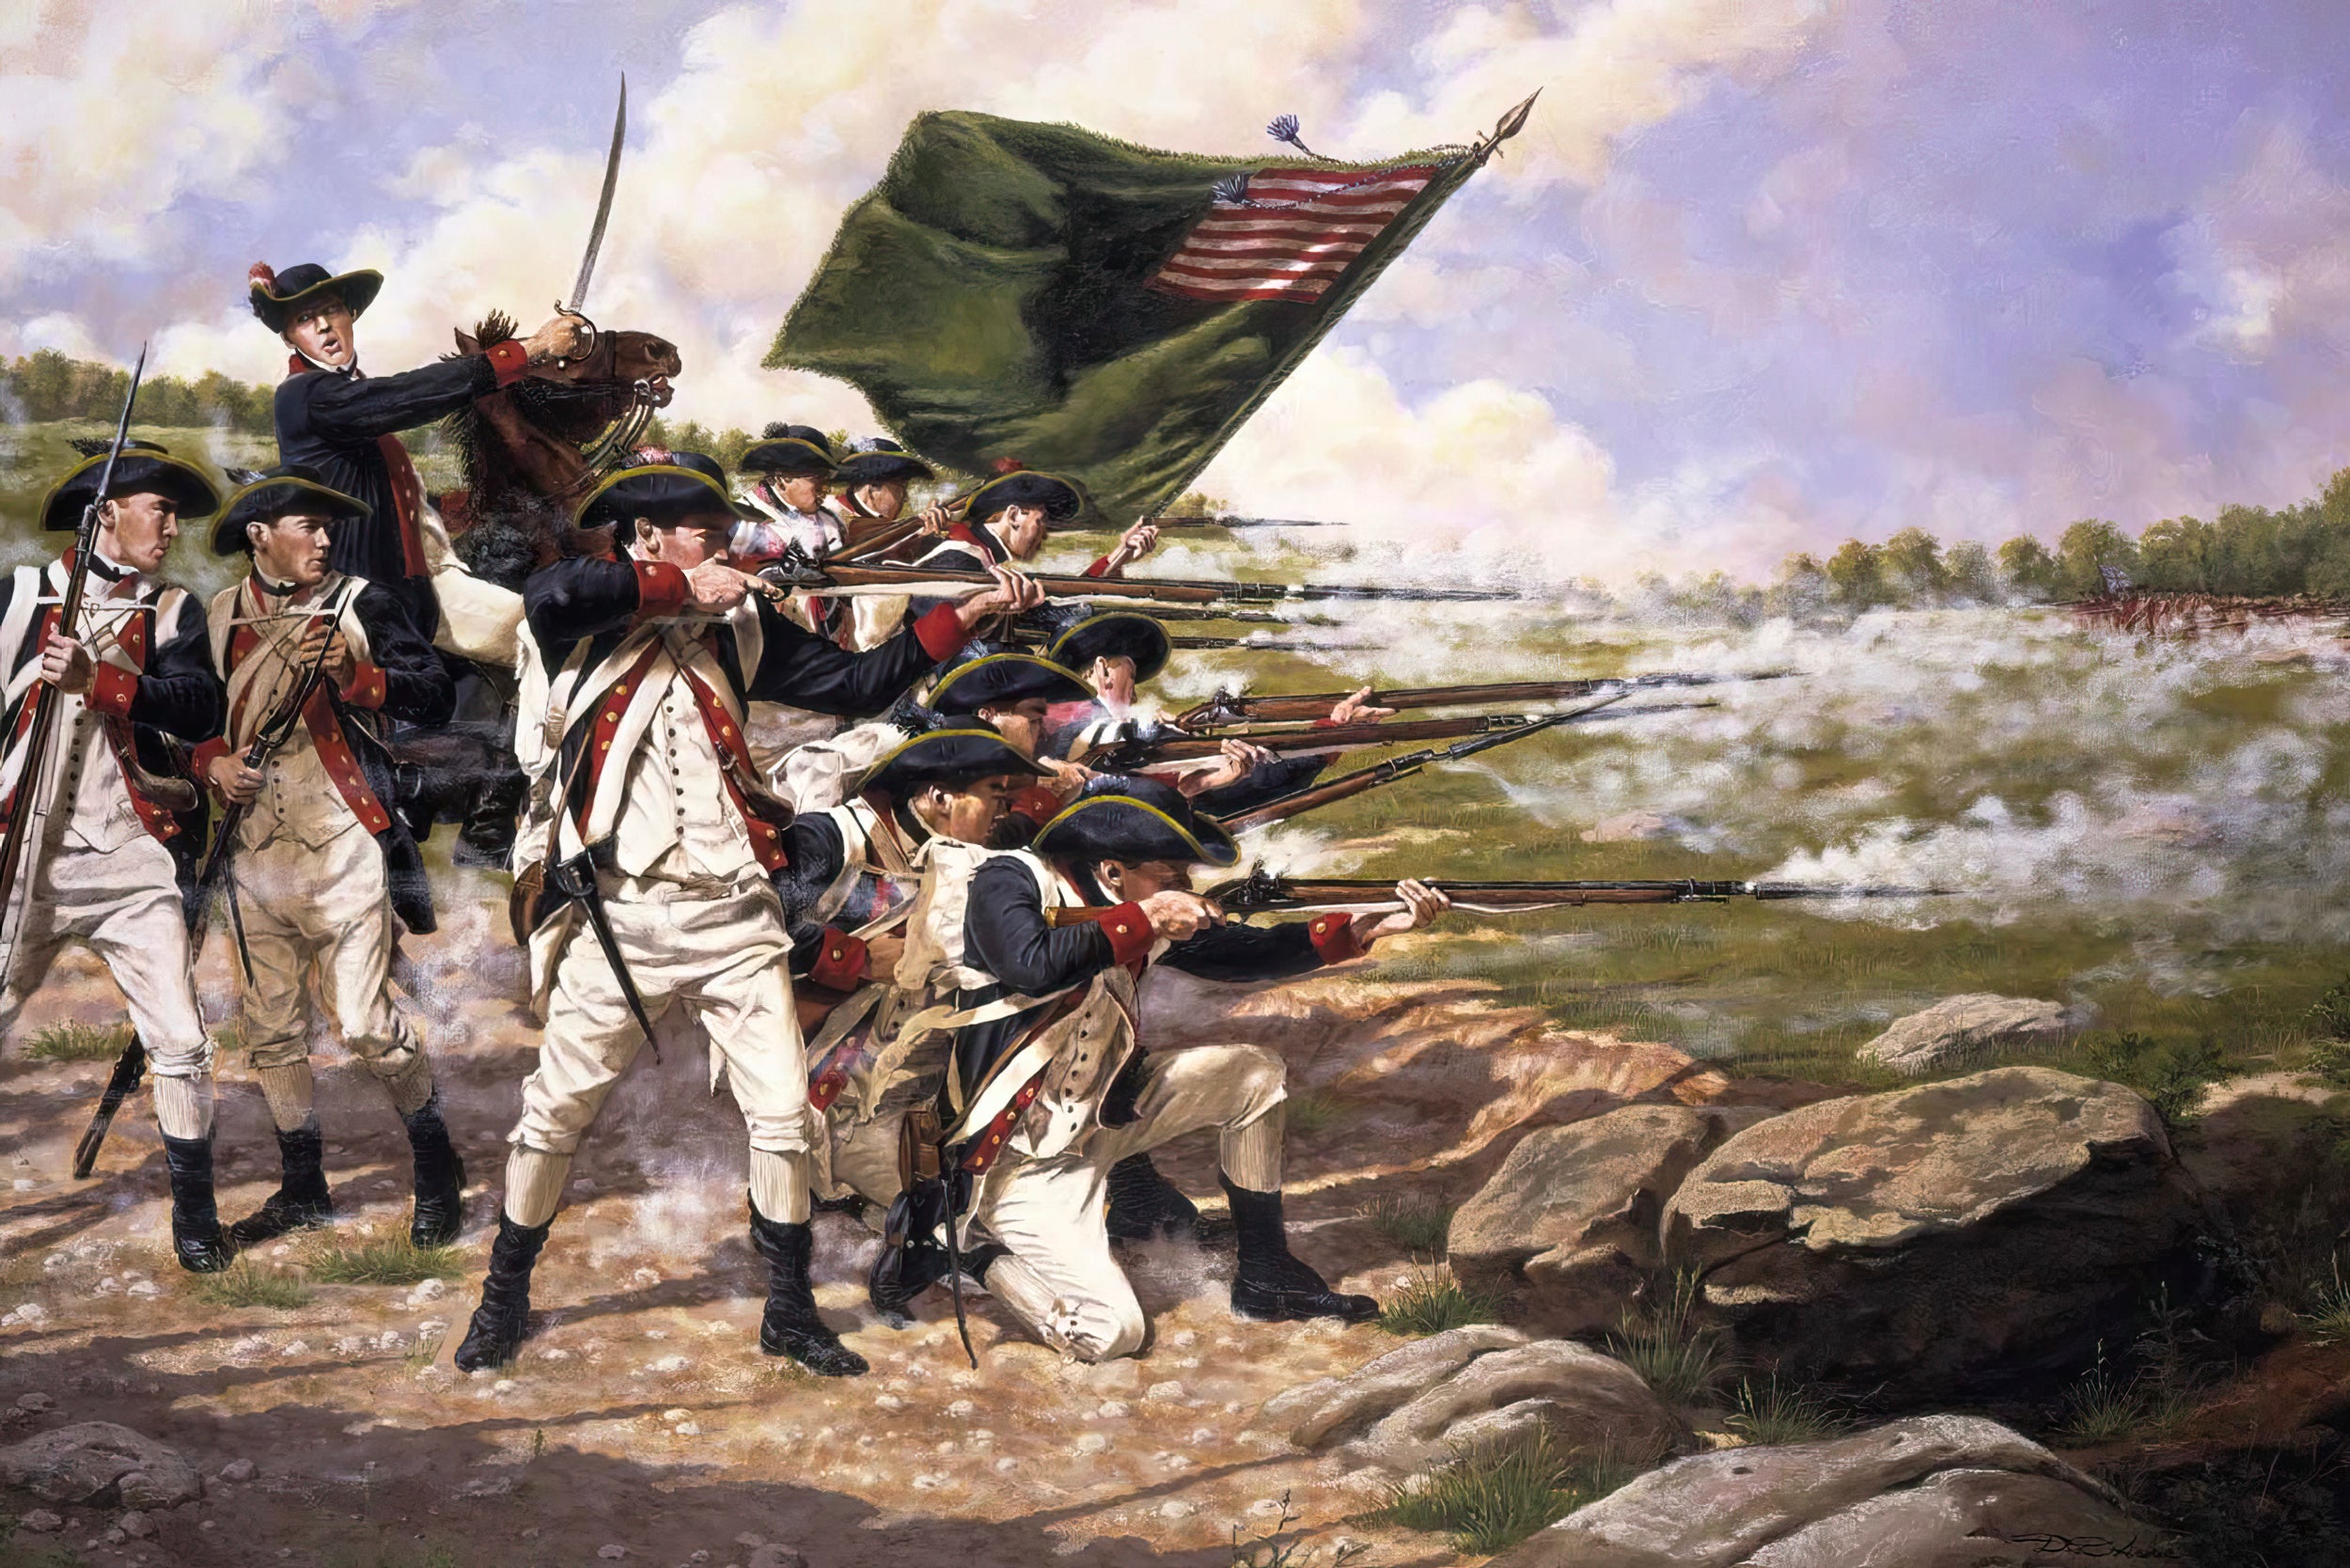 Almanac: U.S. Army Established (June 14, 1775) - Image of the Colonial Army